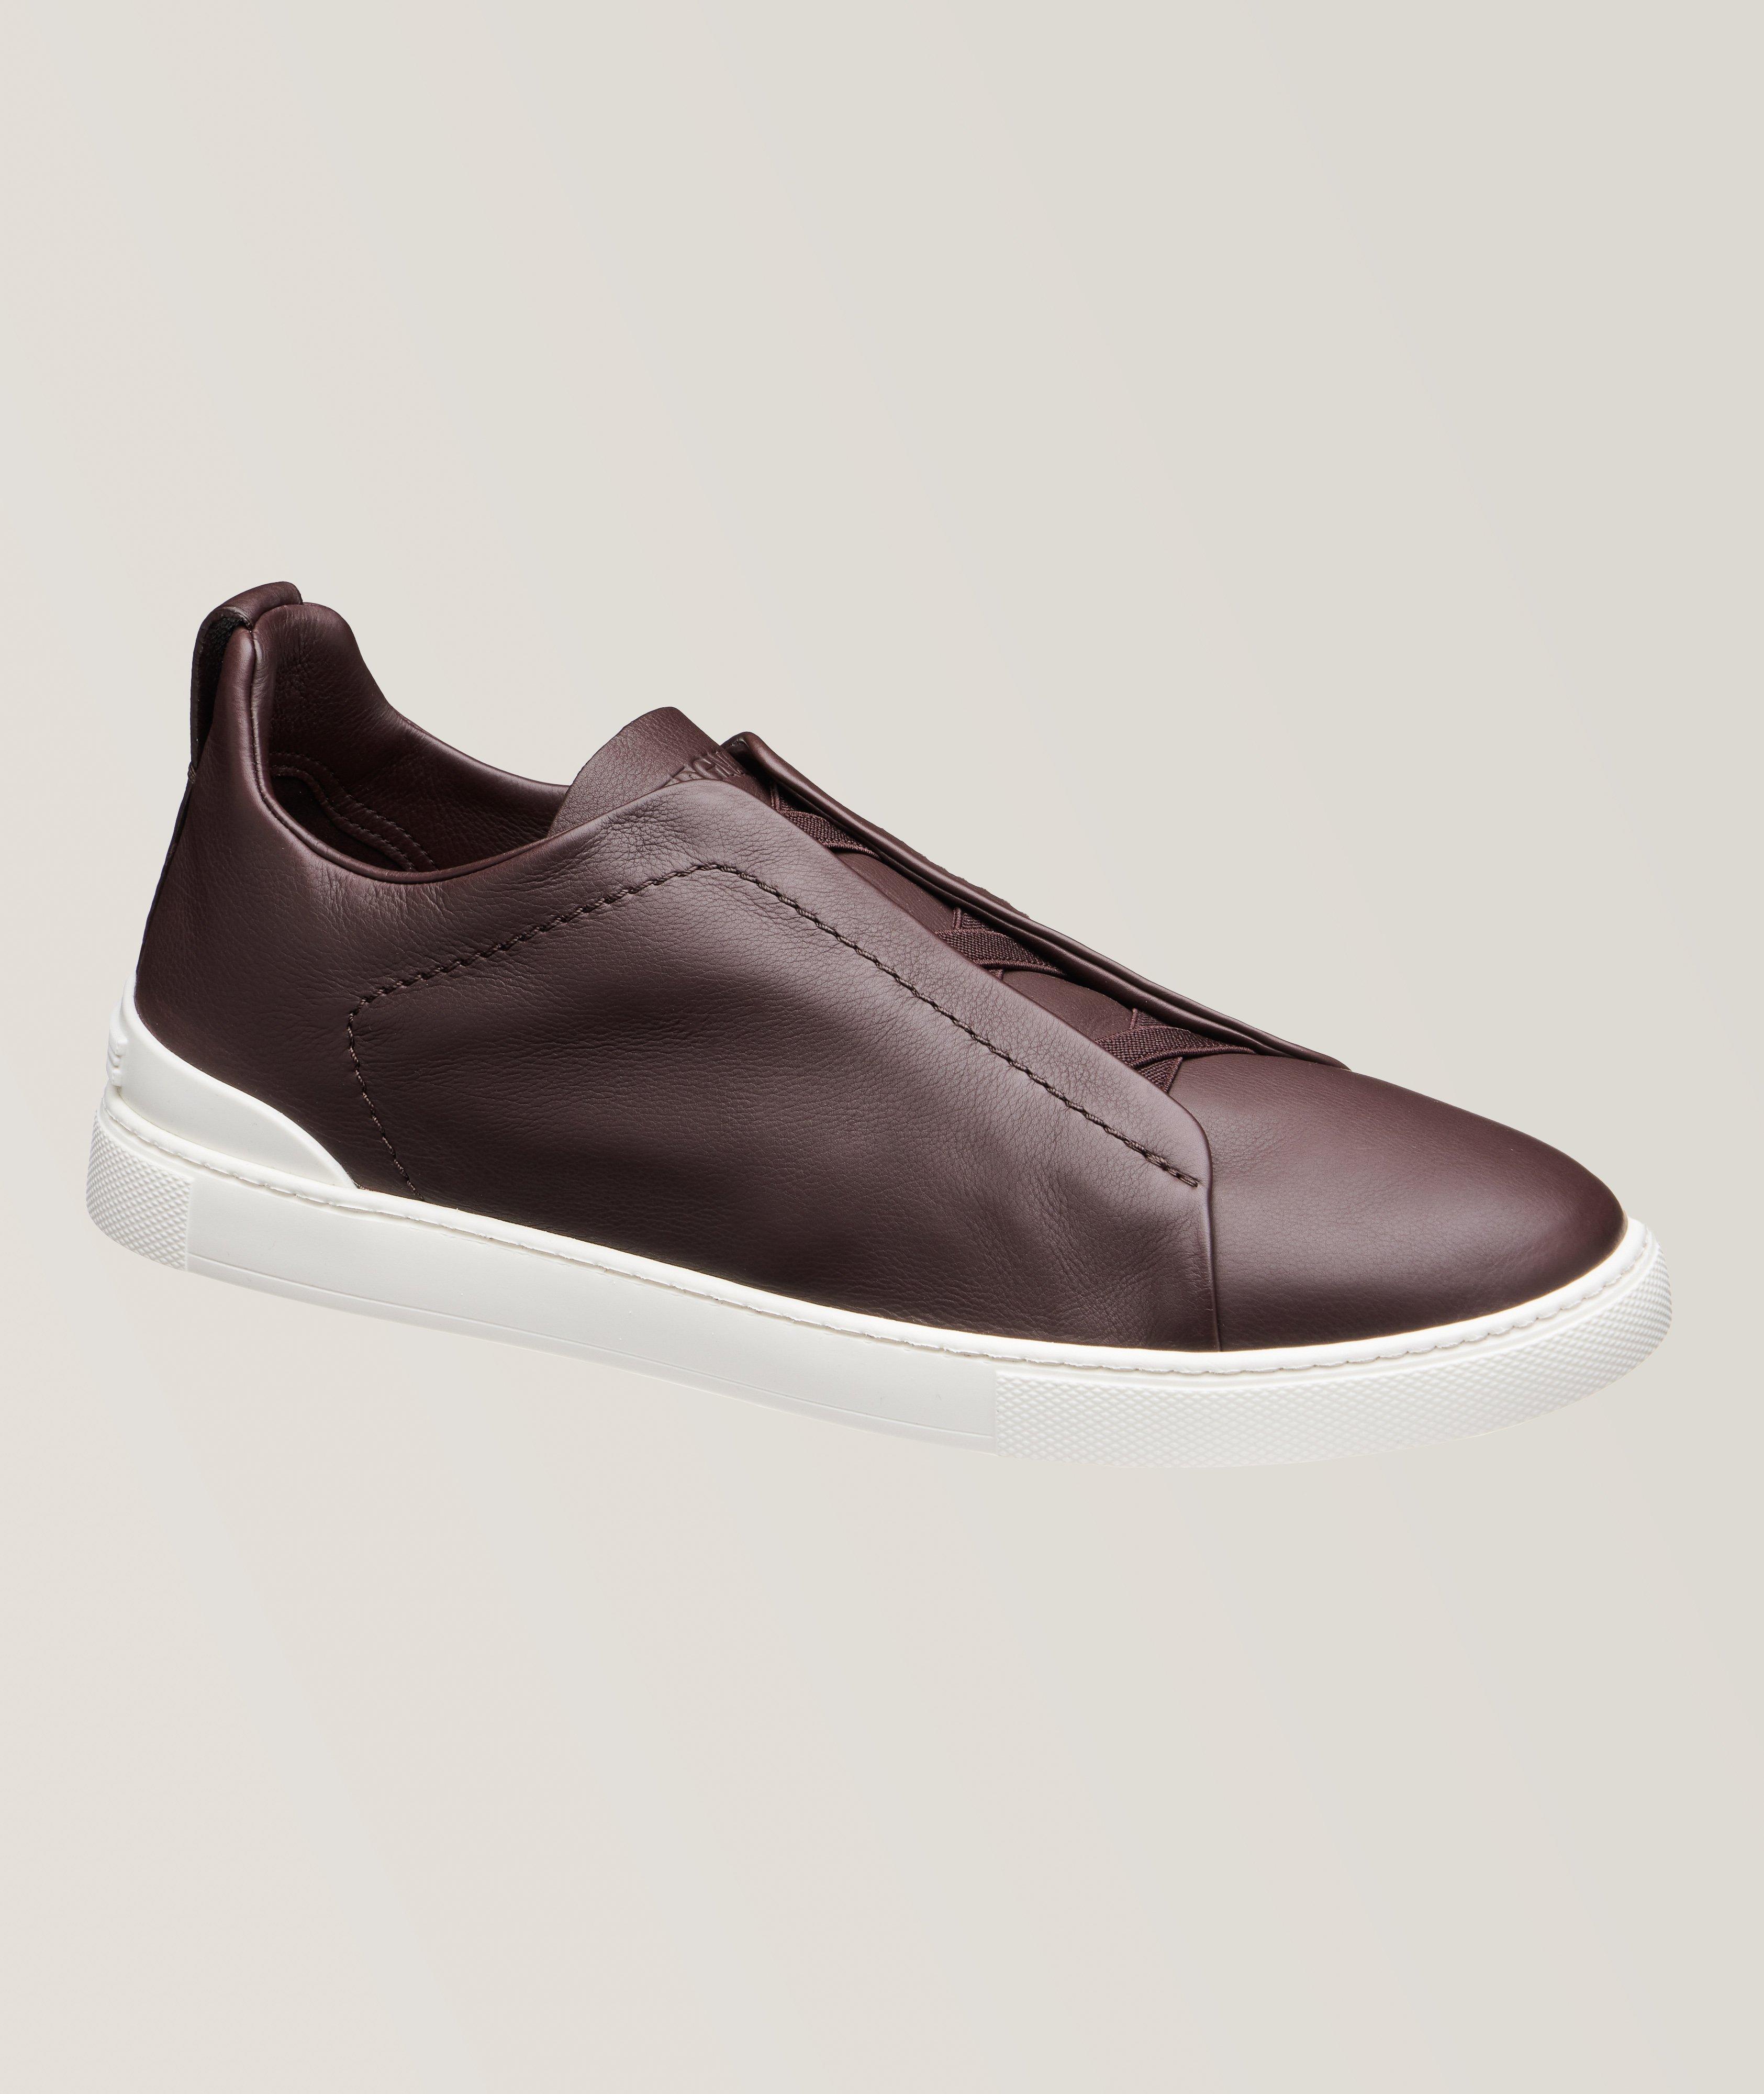 Zegna Triple Stitch Cashmere Leather Sneakers